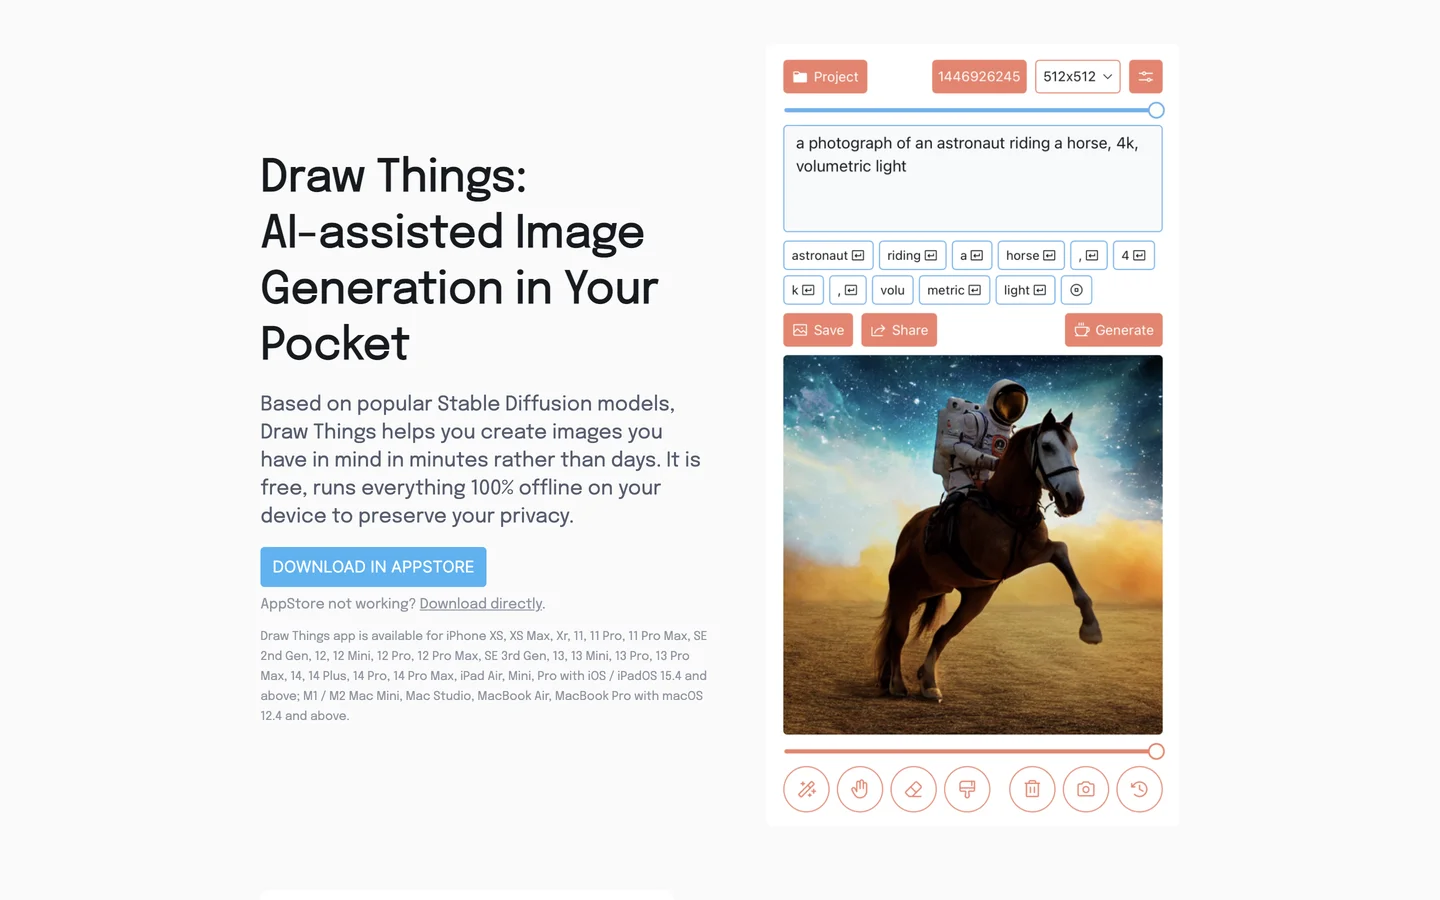 Draw Things: AI-assisted Image Generation